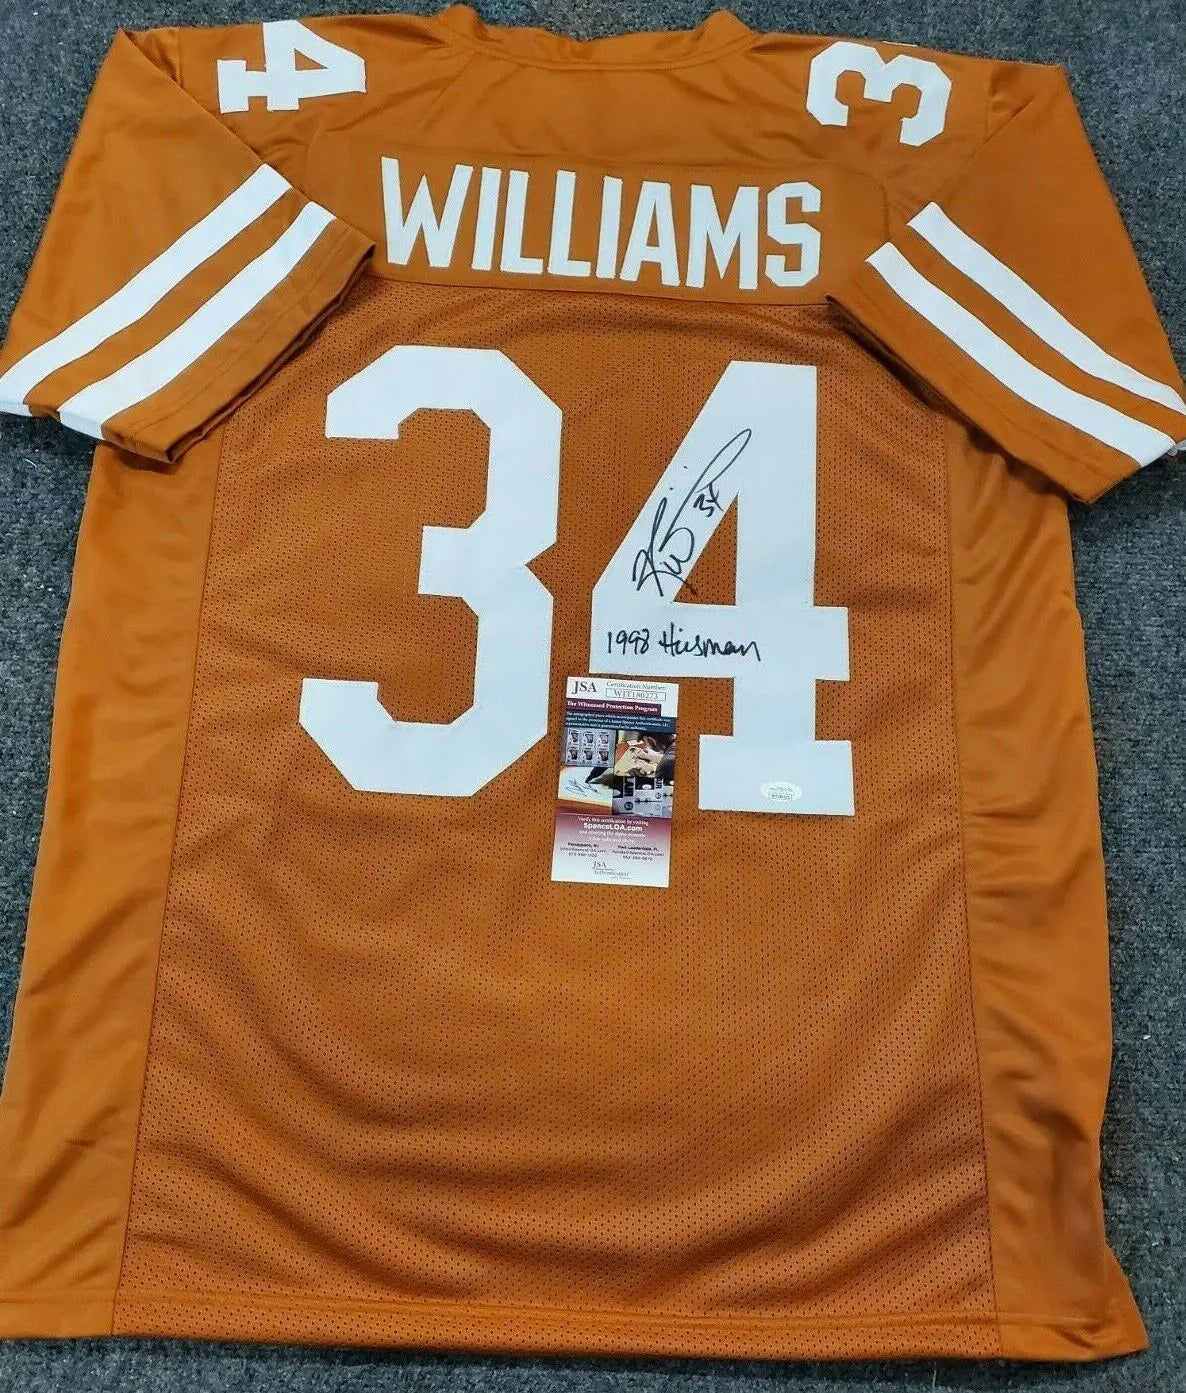 MVP Authentics Texas Longhorns Ricky Williams Signed Inscribed Autographed Jersey Jsa Coa 125.10 sports jersey framing , jersey framing